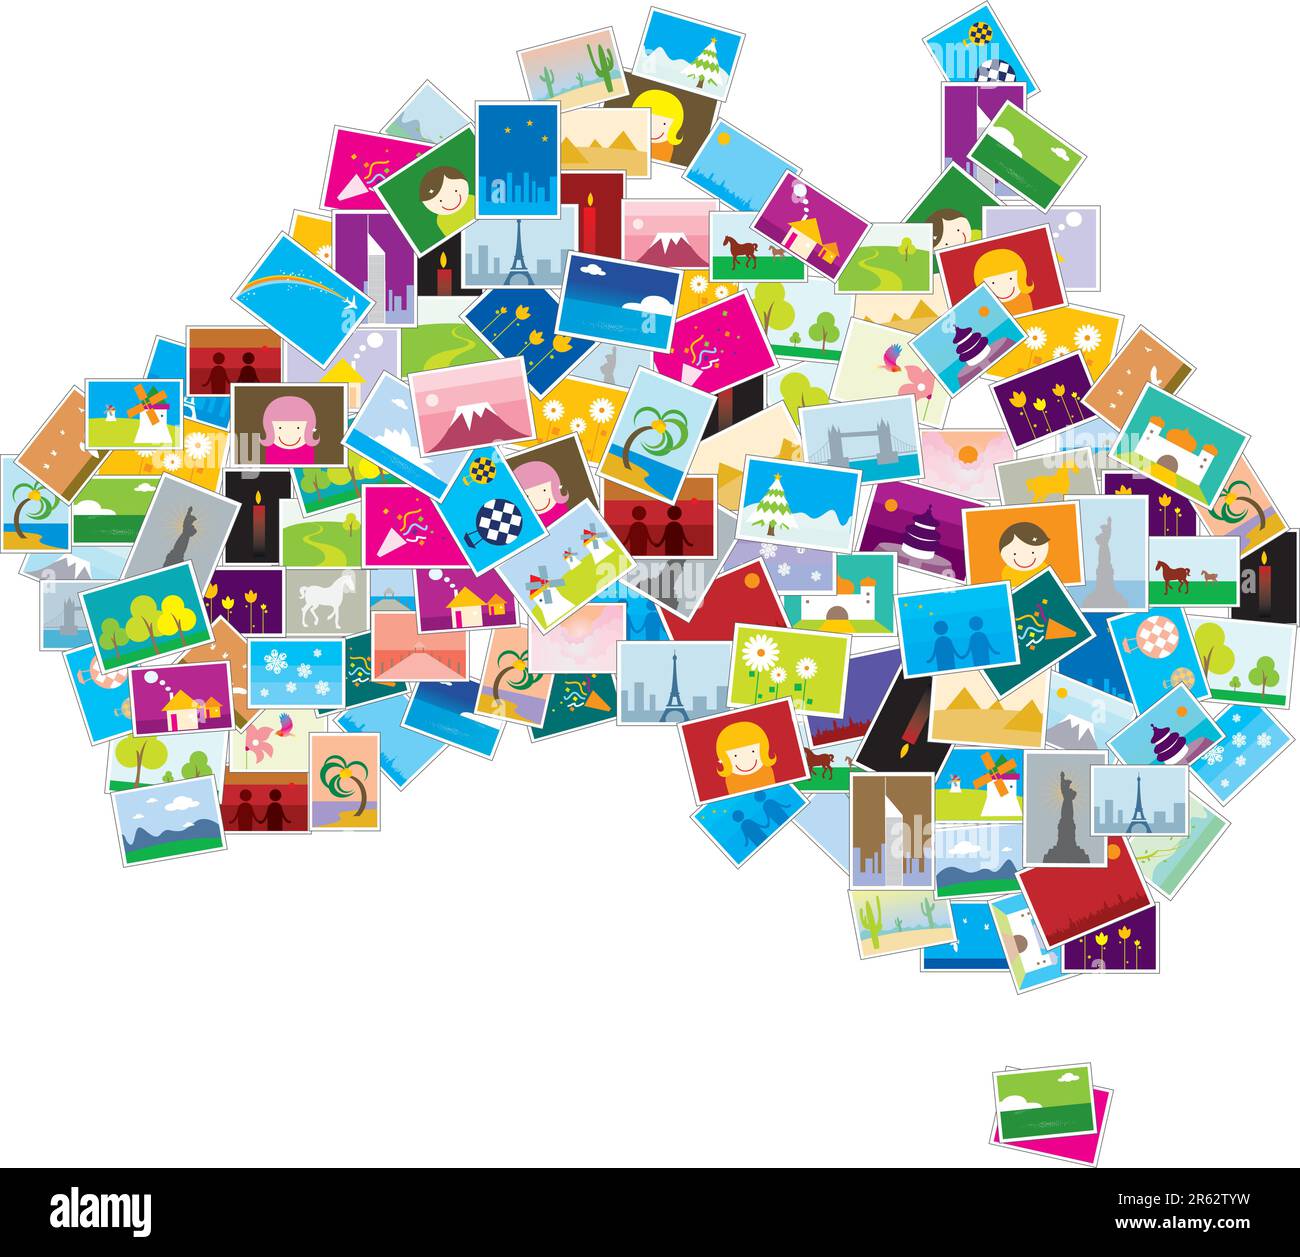 An abstract map of Australia created by strategic arrangement of small illustrations. Stock Vector